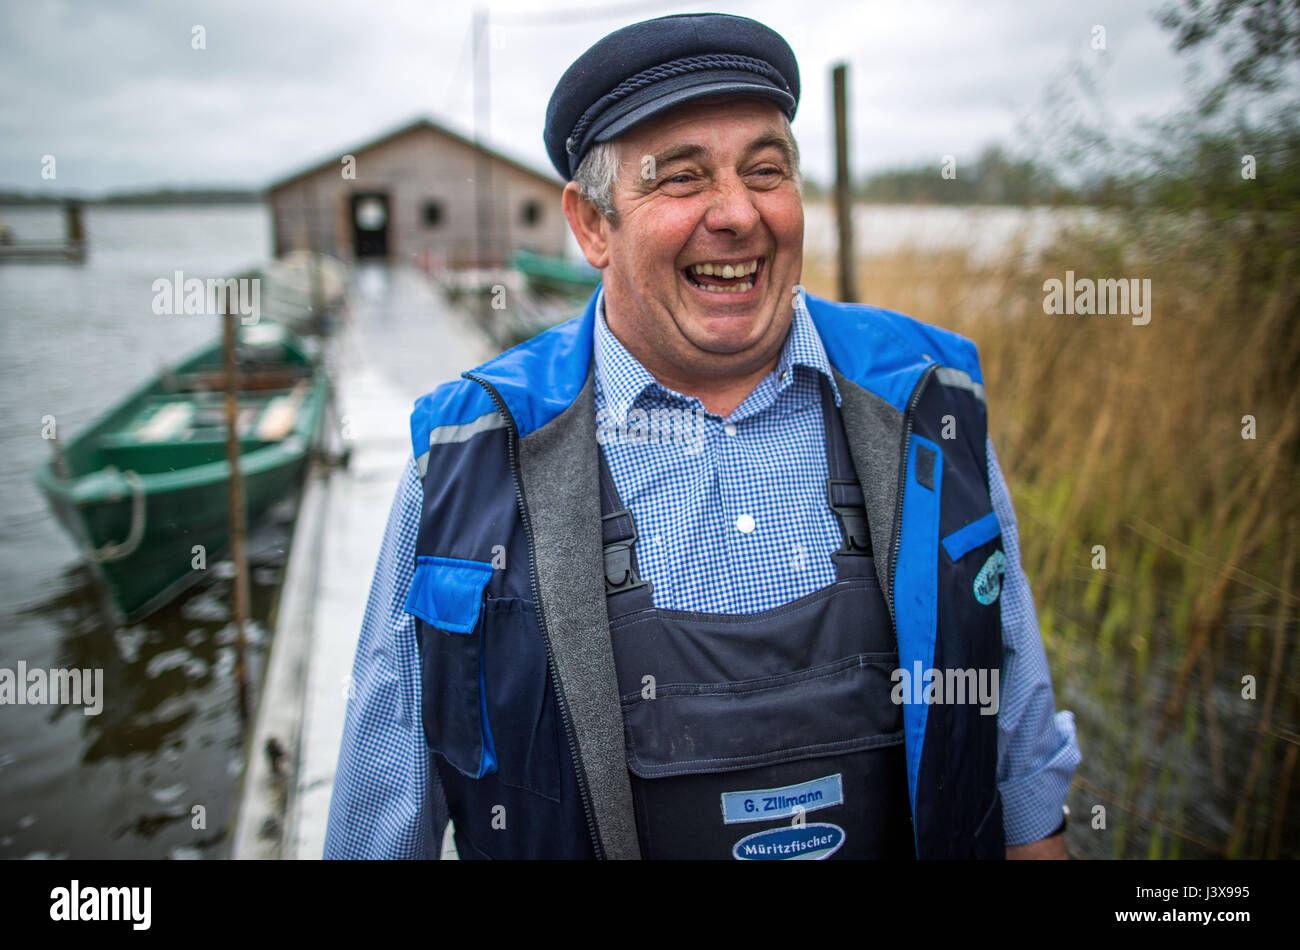 Vipperow, Germany. 4th May, 2017. Inland fisher Guenter Zillmann smiles during work at the fish farm at the Mueritz in Vipperow, Germany, 4 May 2017. The fish farm is part of the largest inland fishery in Germany: Fishery Mueitz-Plau GmbH. Besides the tradition fishery and the breeding of fish, modern aqua culture is also part of the business. The fishery, founded in 1990 from the former production cooperative (founded 1952) holds more than 30.000 hectars of water. Photo: Jens Büttner/dpa-Zentralbild/dpa/Alamy Live News Stock Photo